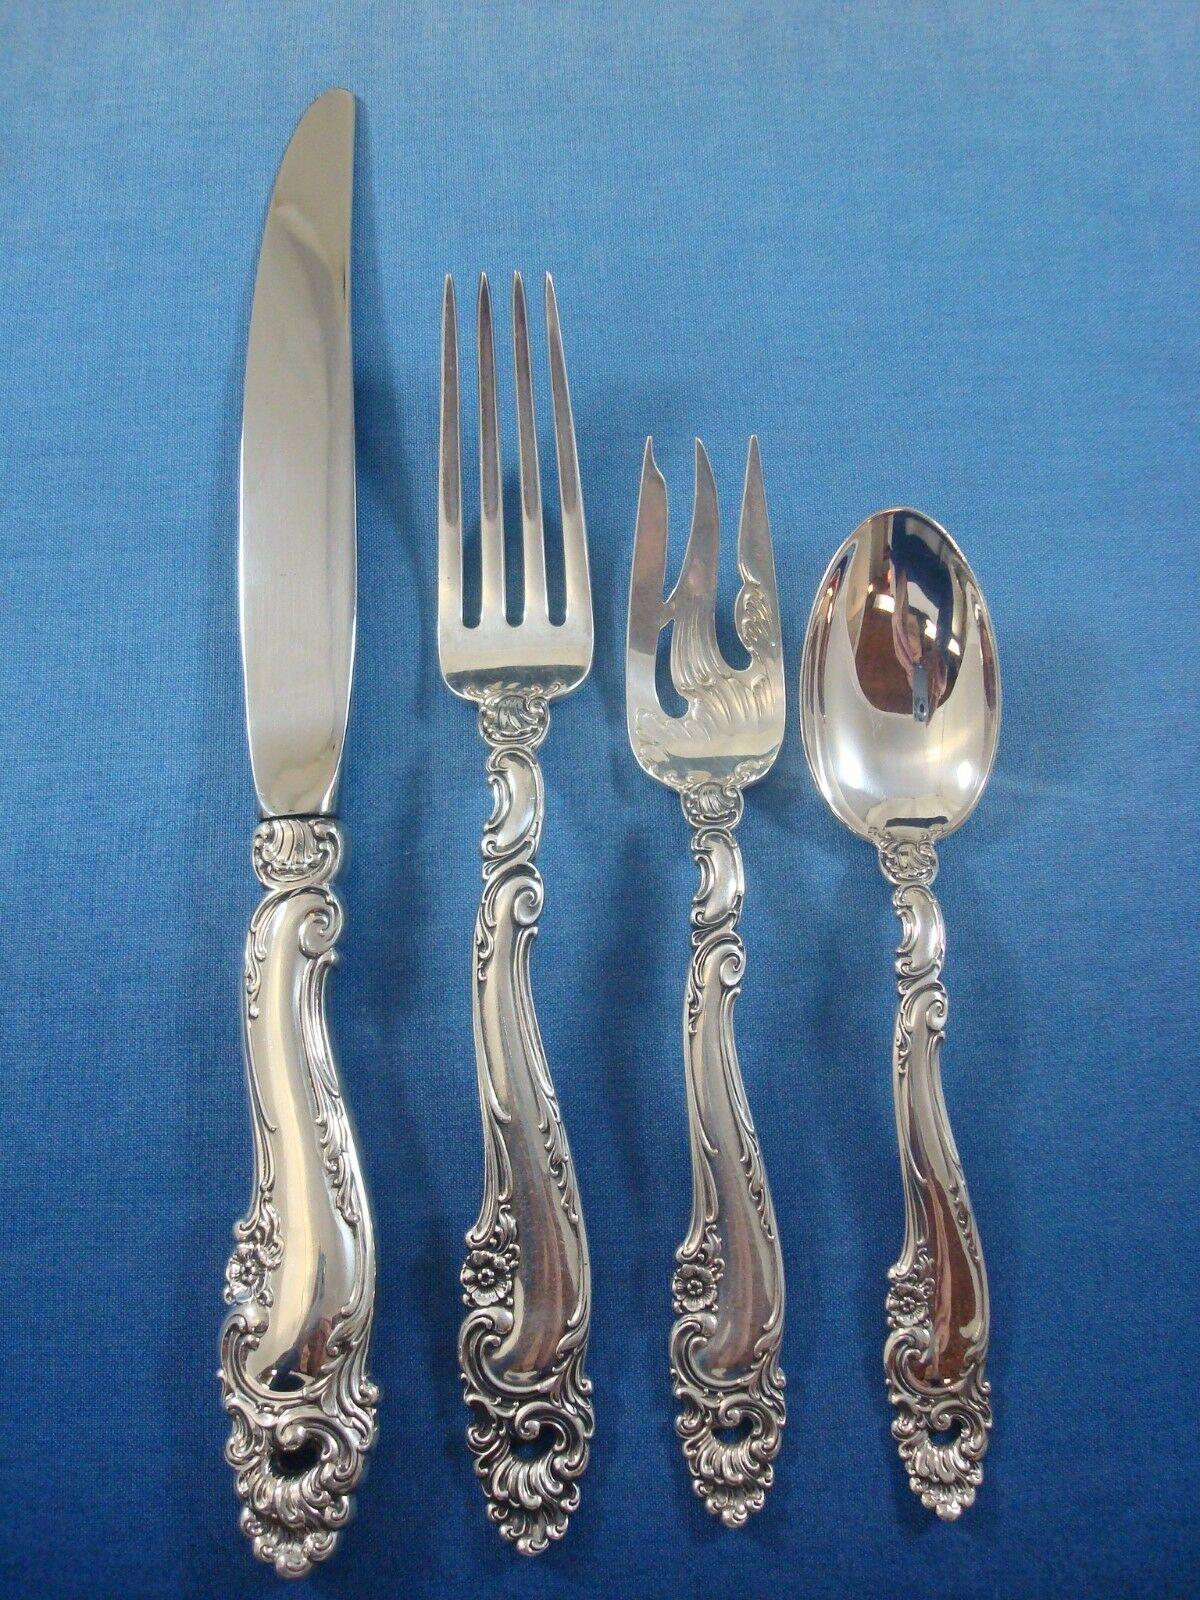 Rococo Decor by Gorham Sterling Silver Flatware Set for 12 Service 63 Pieces Dinner